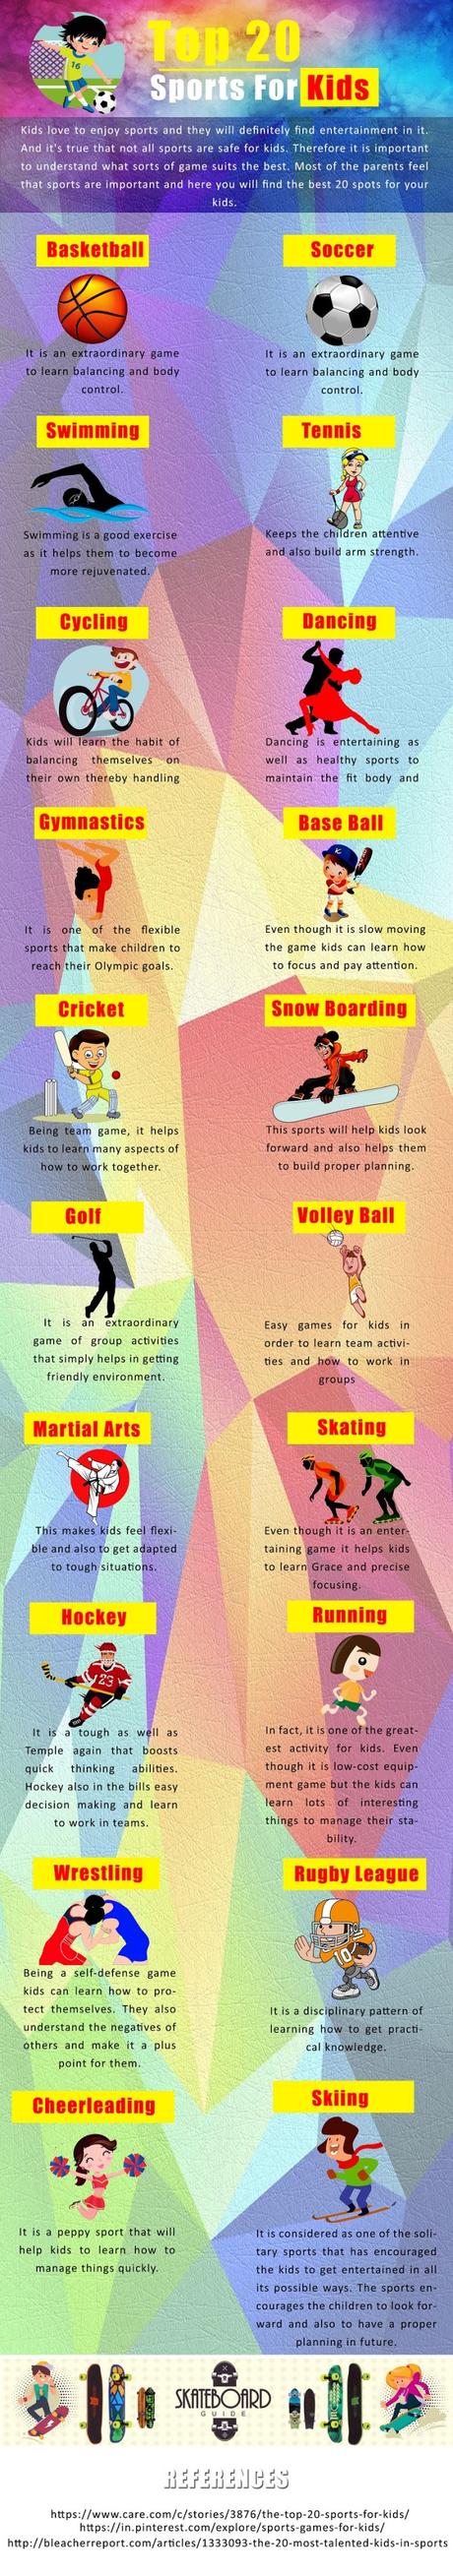 Top 20 Sports For Kids